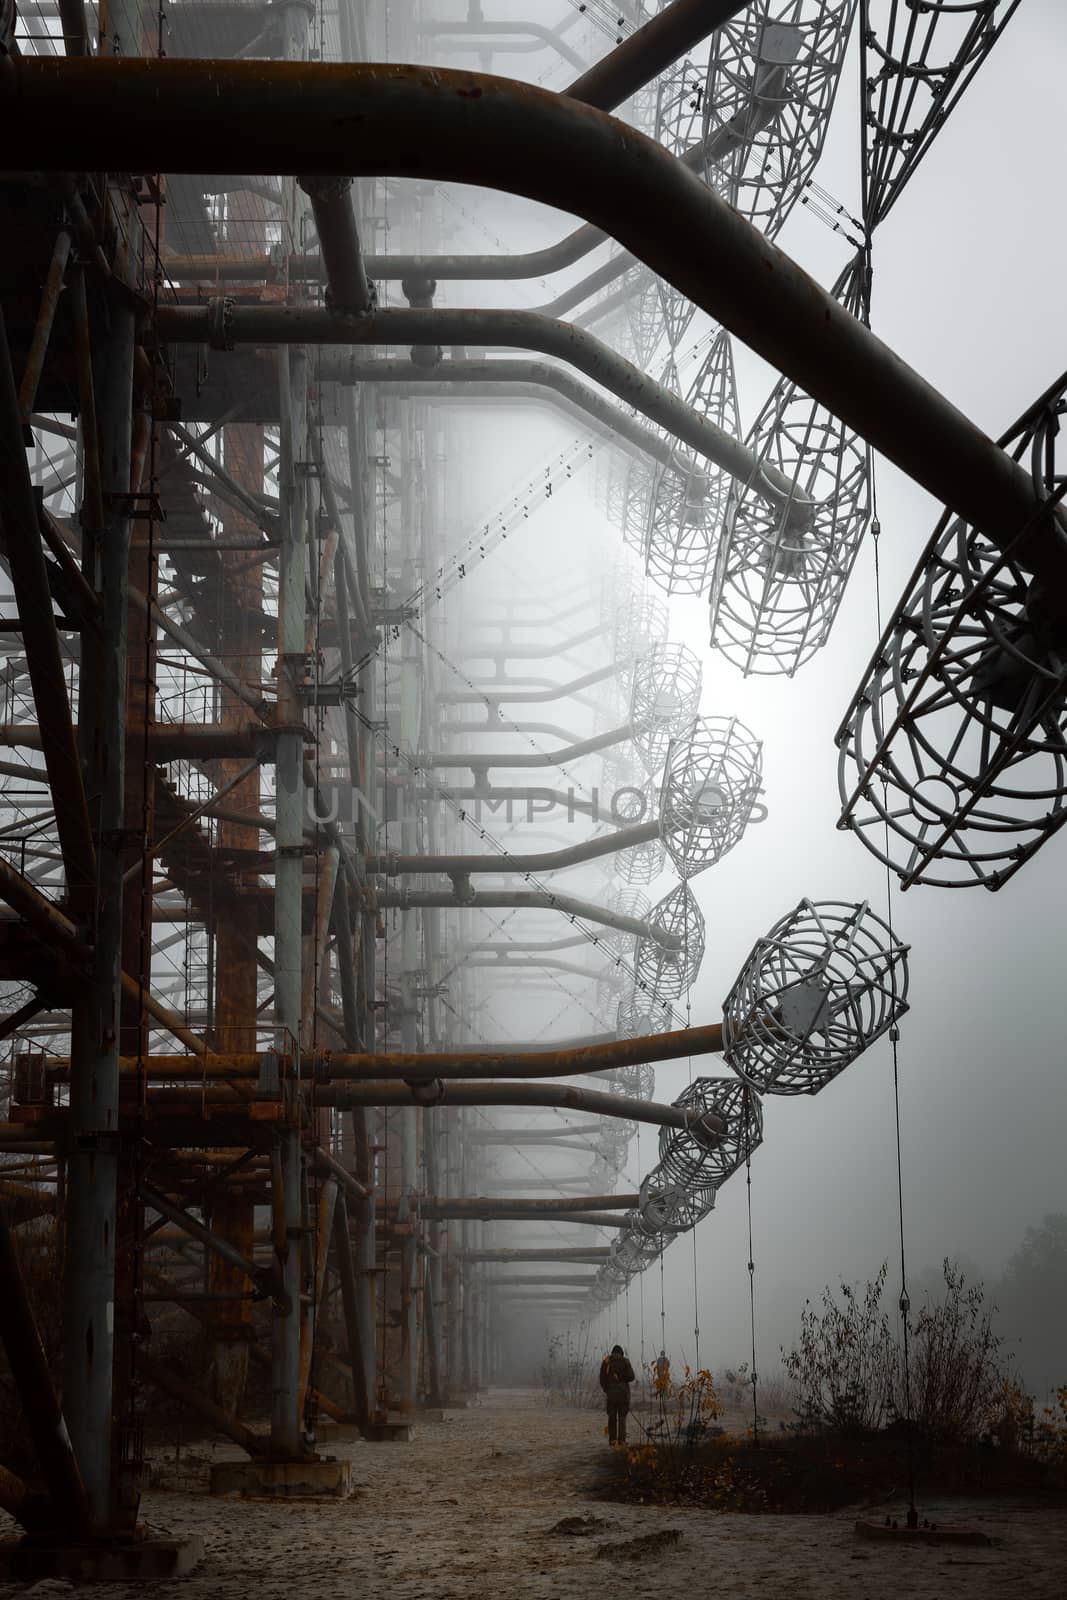 Duga Antenna Complex in Chernobyl Exclusion zone 2019 by svedoliver